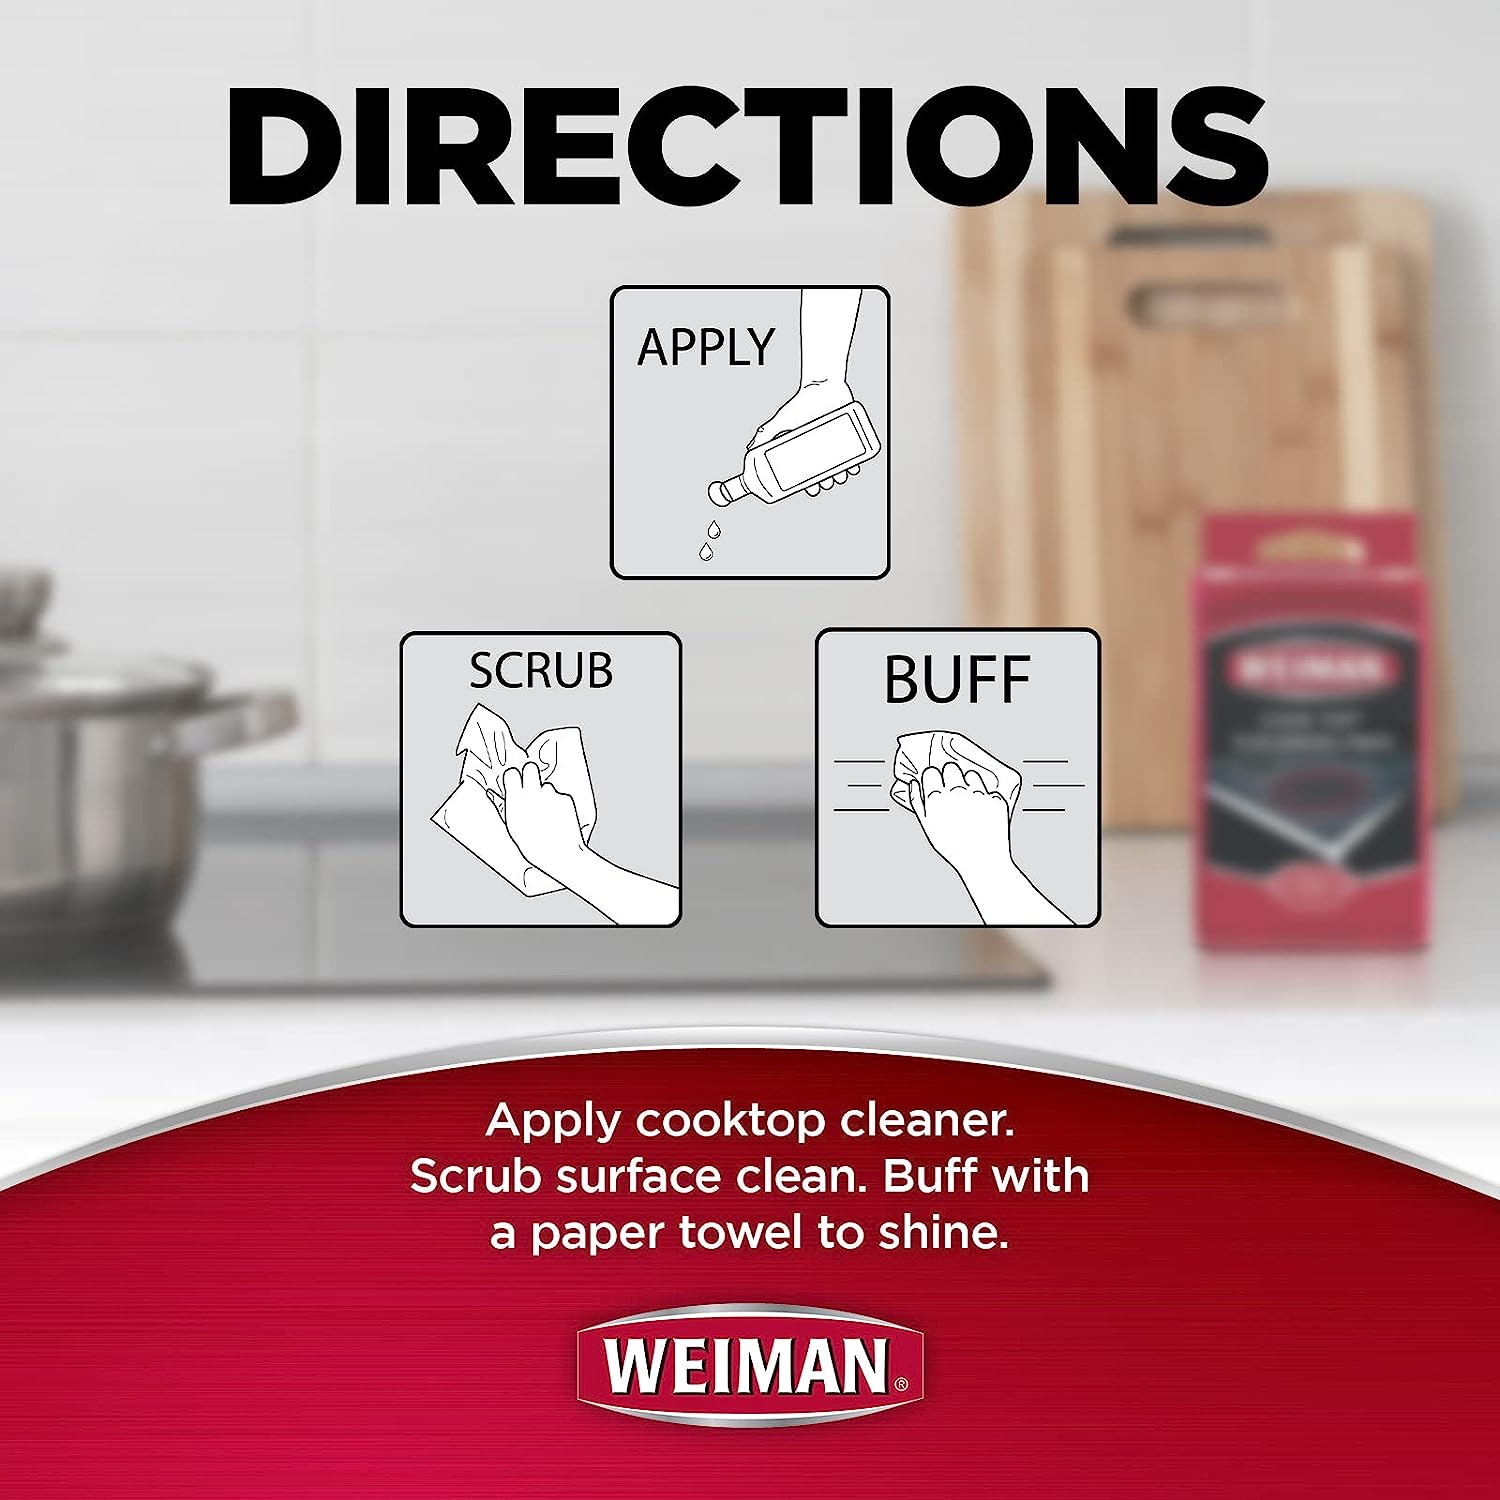 Weiman Cook Top Scrubbing Pads, 3 Count, 2 Pack Cuts Through the Toughest Stains - Scrubbing Pads Carefully Wipe Away Residue : Health & Household